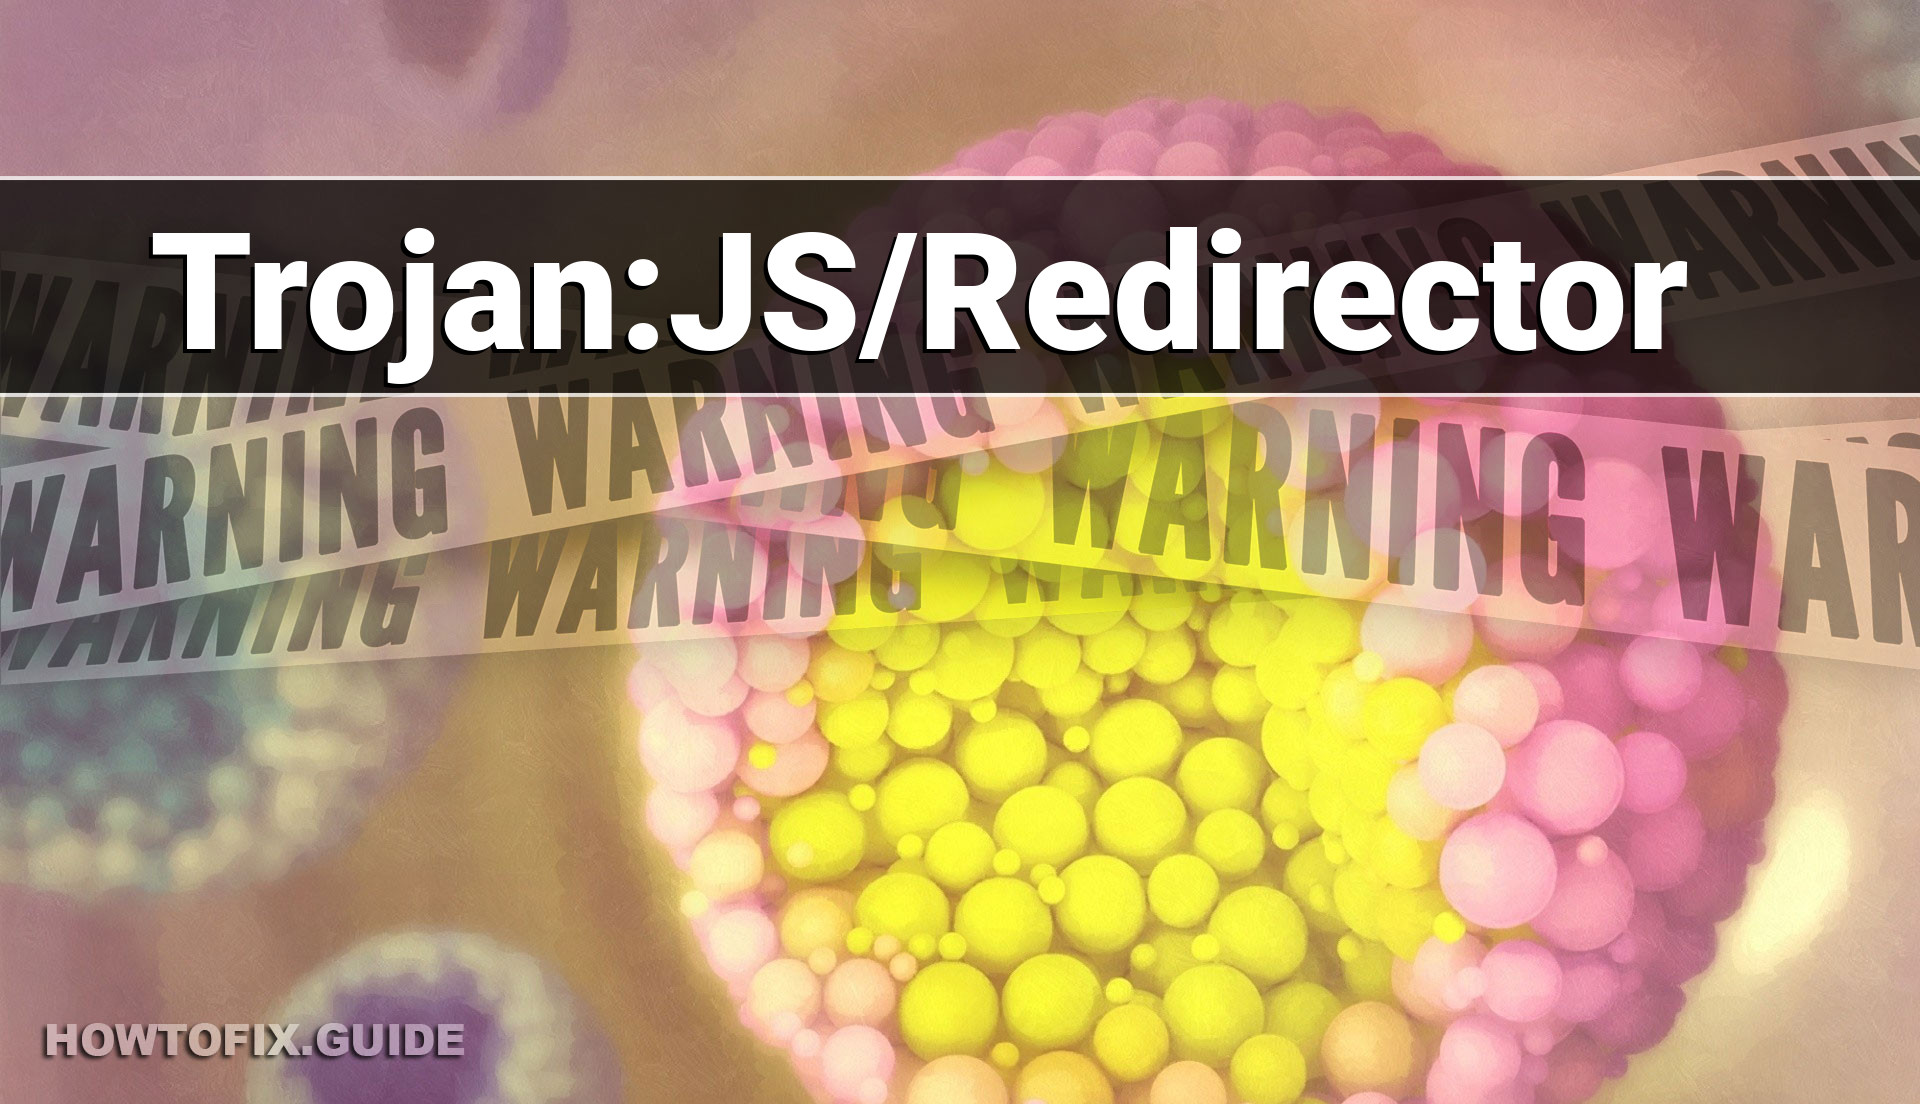 js redirector removal tool avast